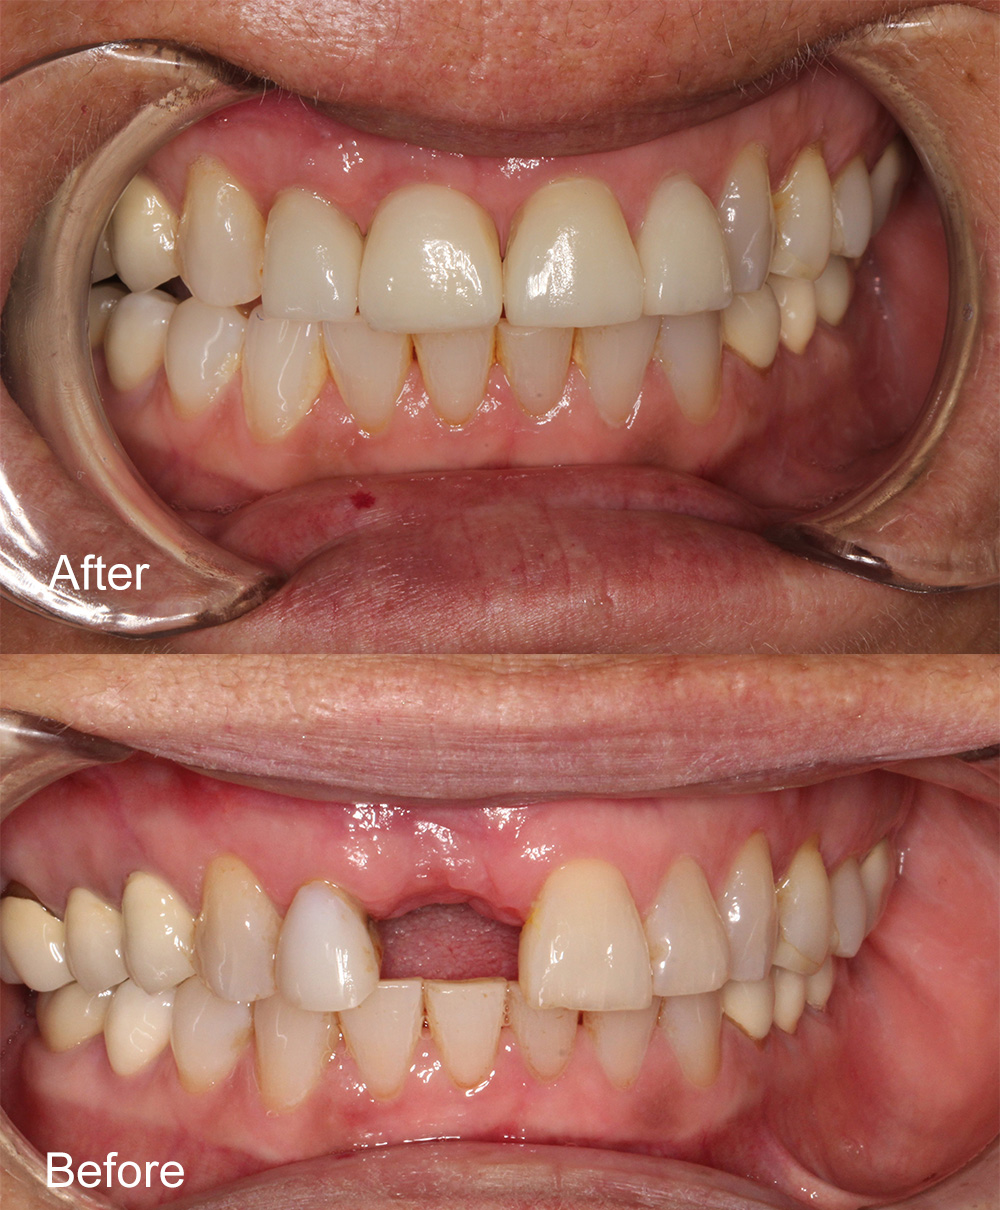 Before and After Dental Implant from Bayview Dental Claremont, Perth